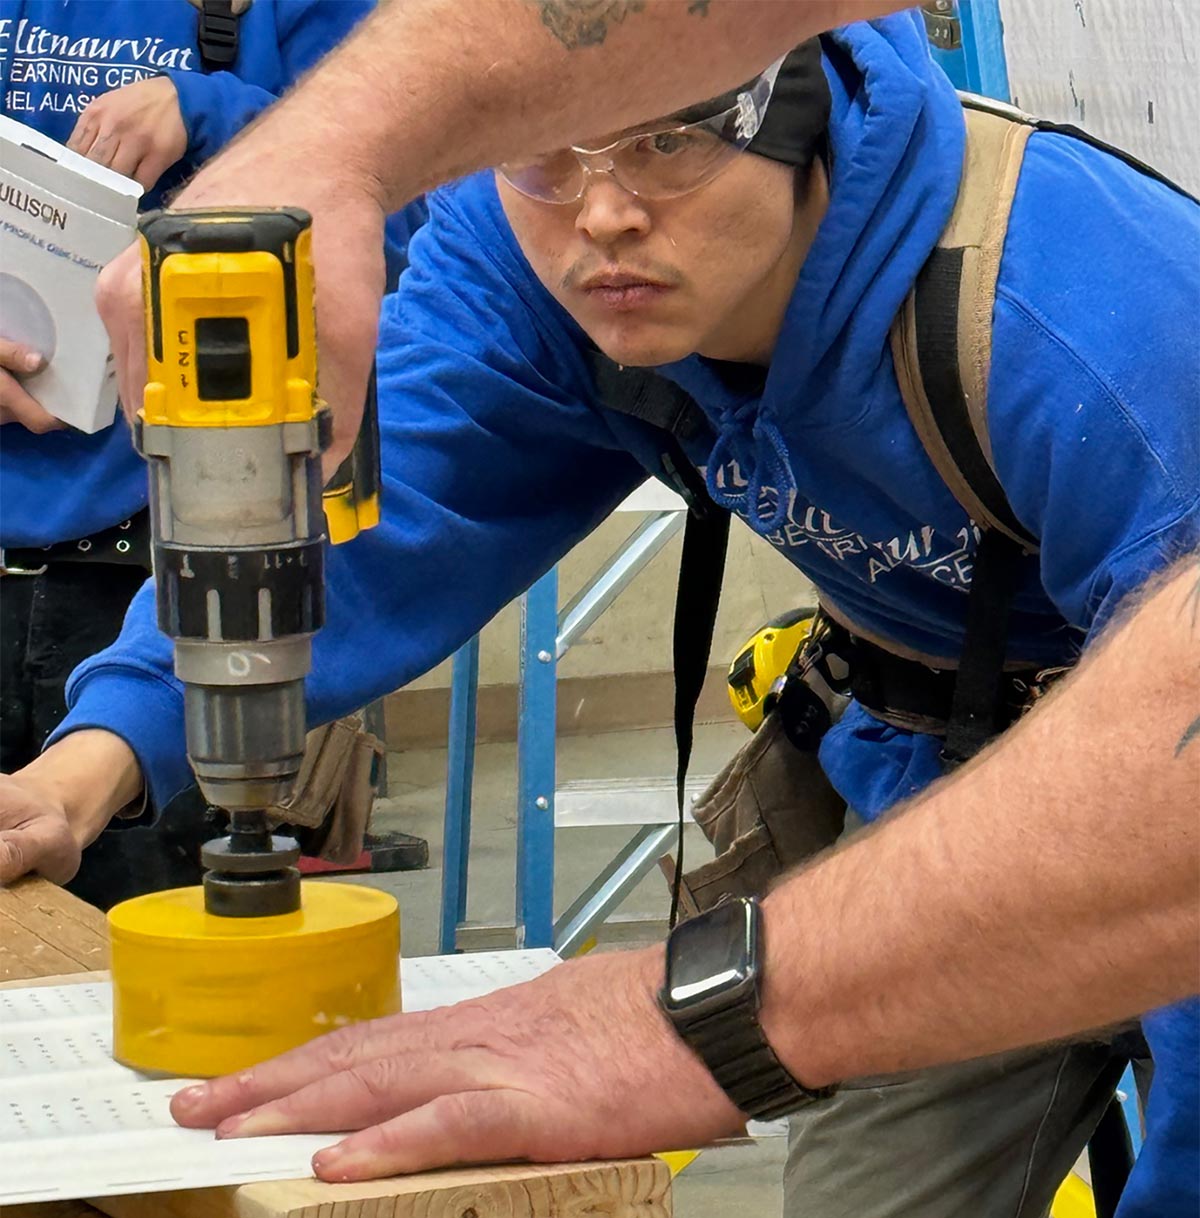 student wearing safety glasses watching a teacher using power tools